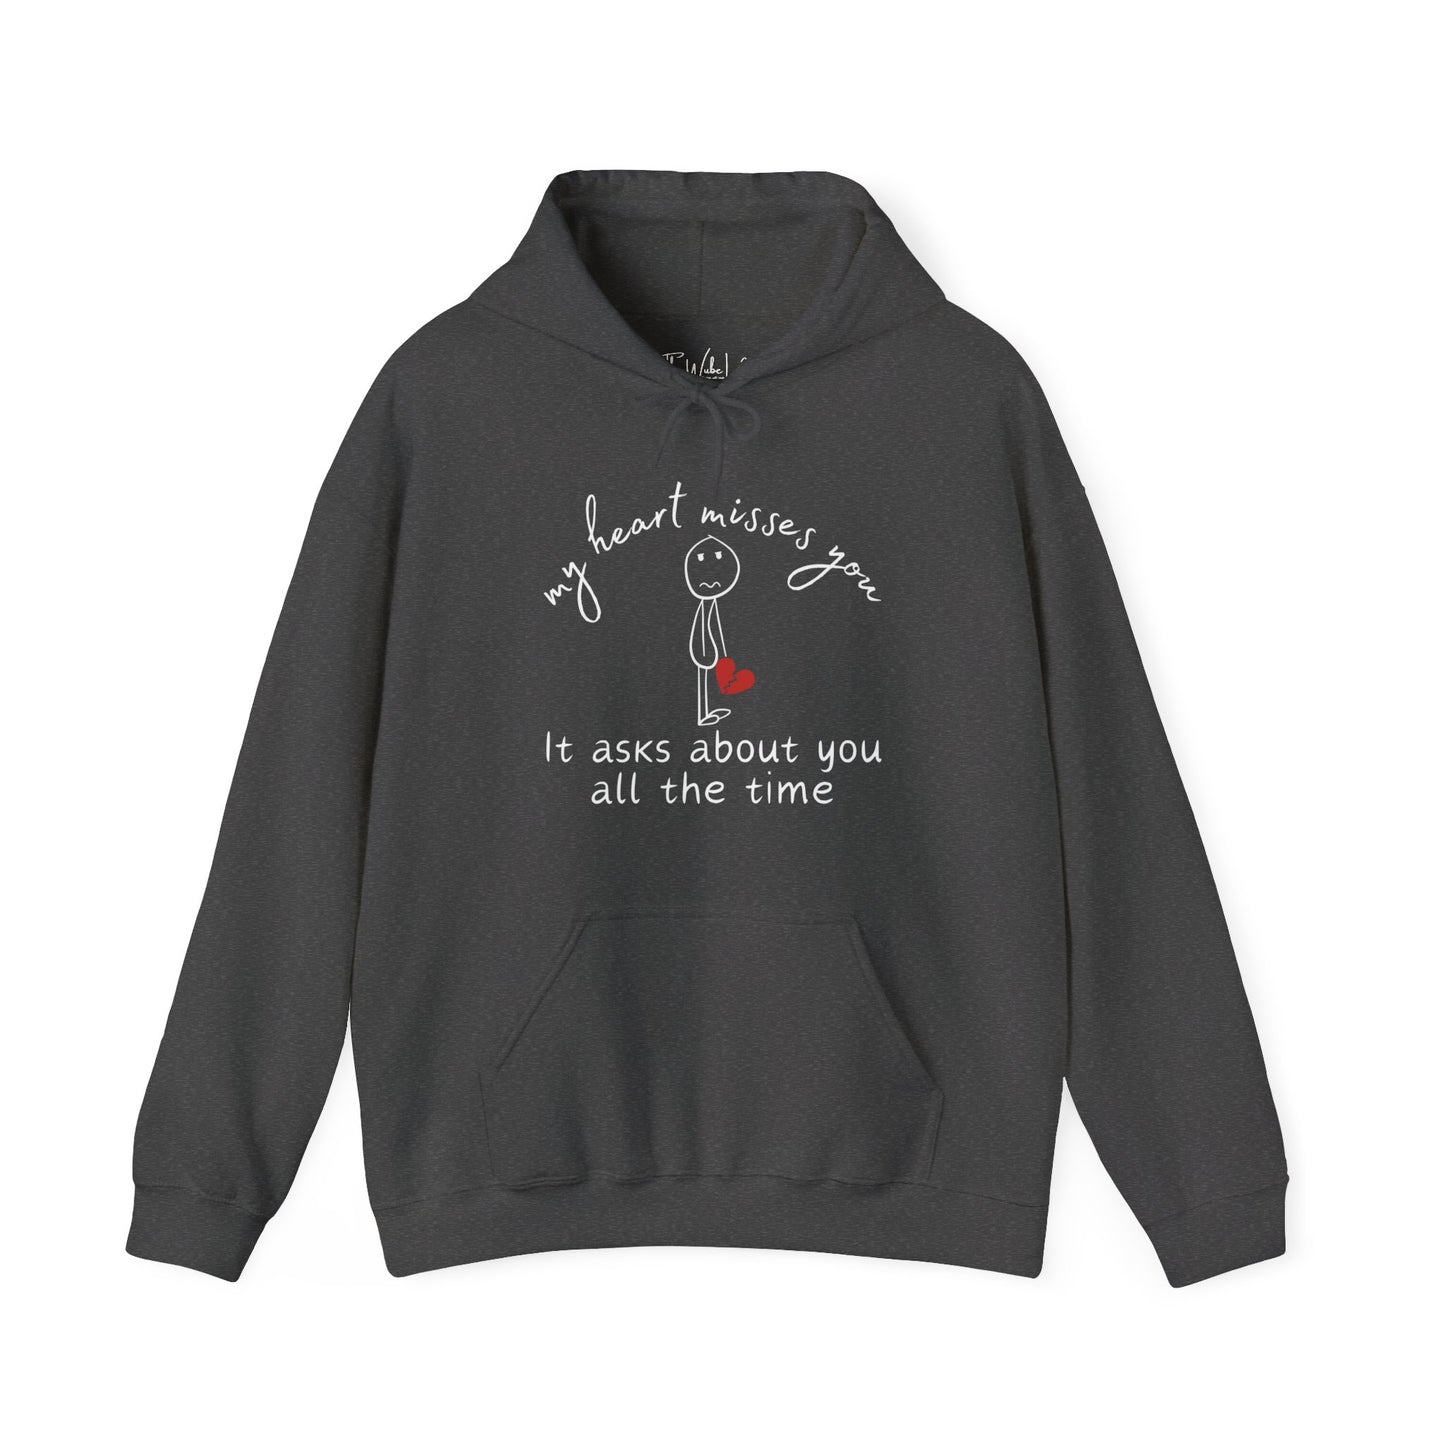 Gildan 18500 Hooded Sweatshirt, color: dark heather - hoodie with a heartfelt design to provide comfort and solace during grief and loss.